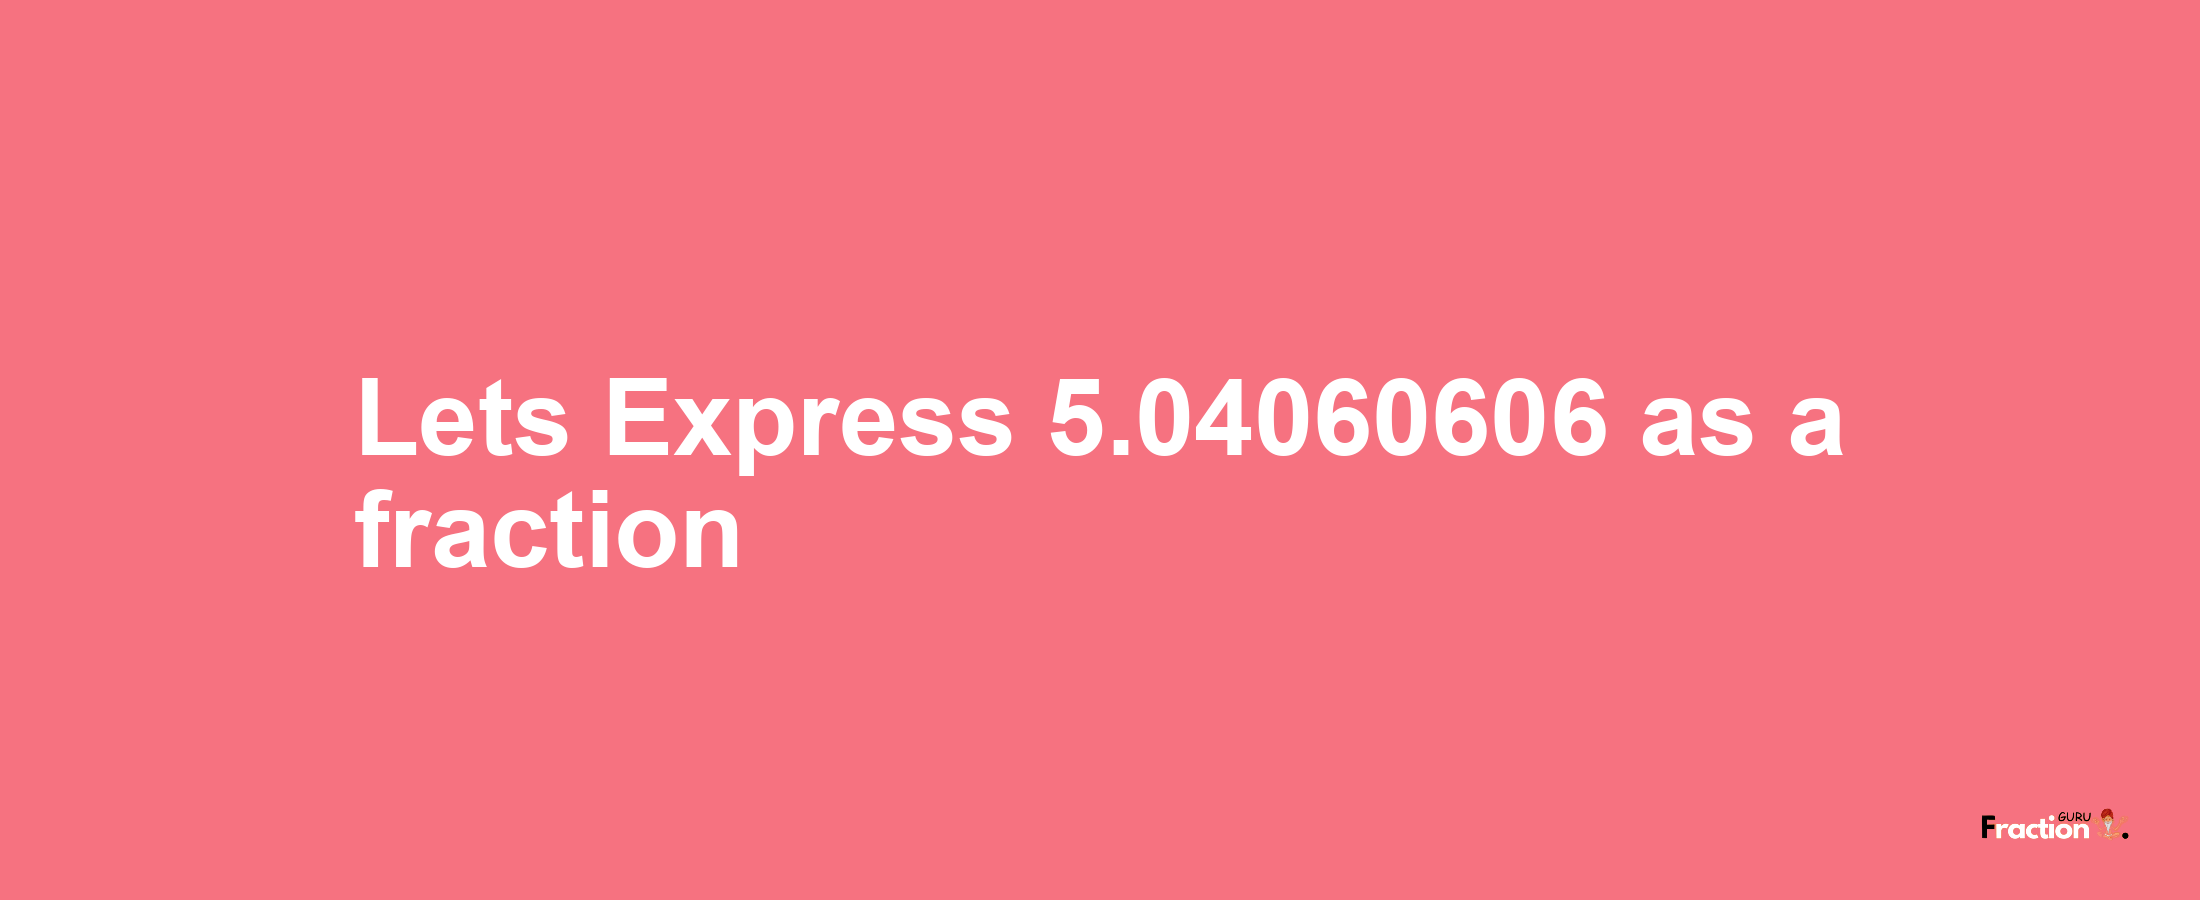 Lets Express 5.04060606 as afraction